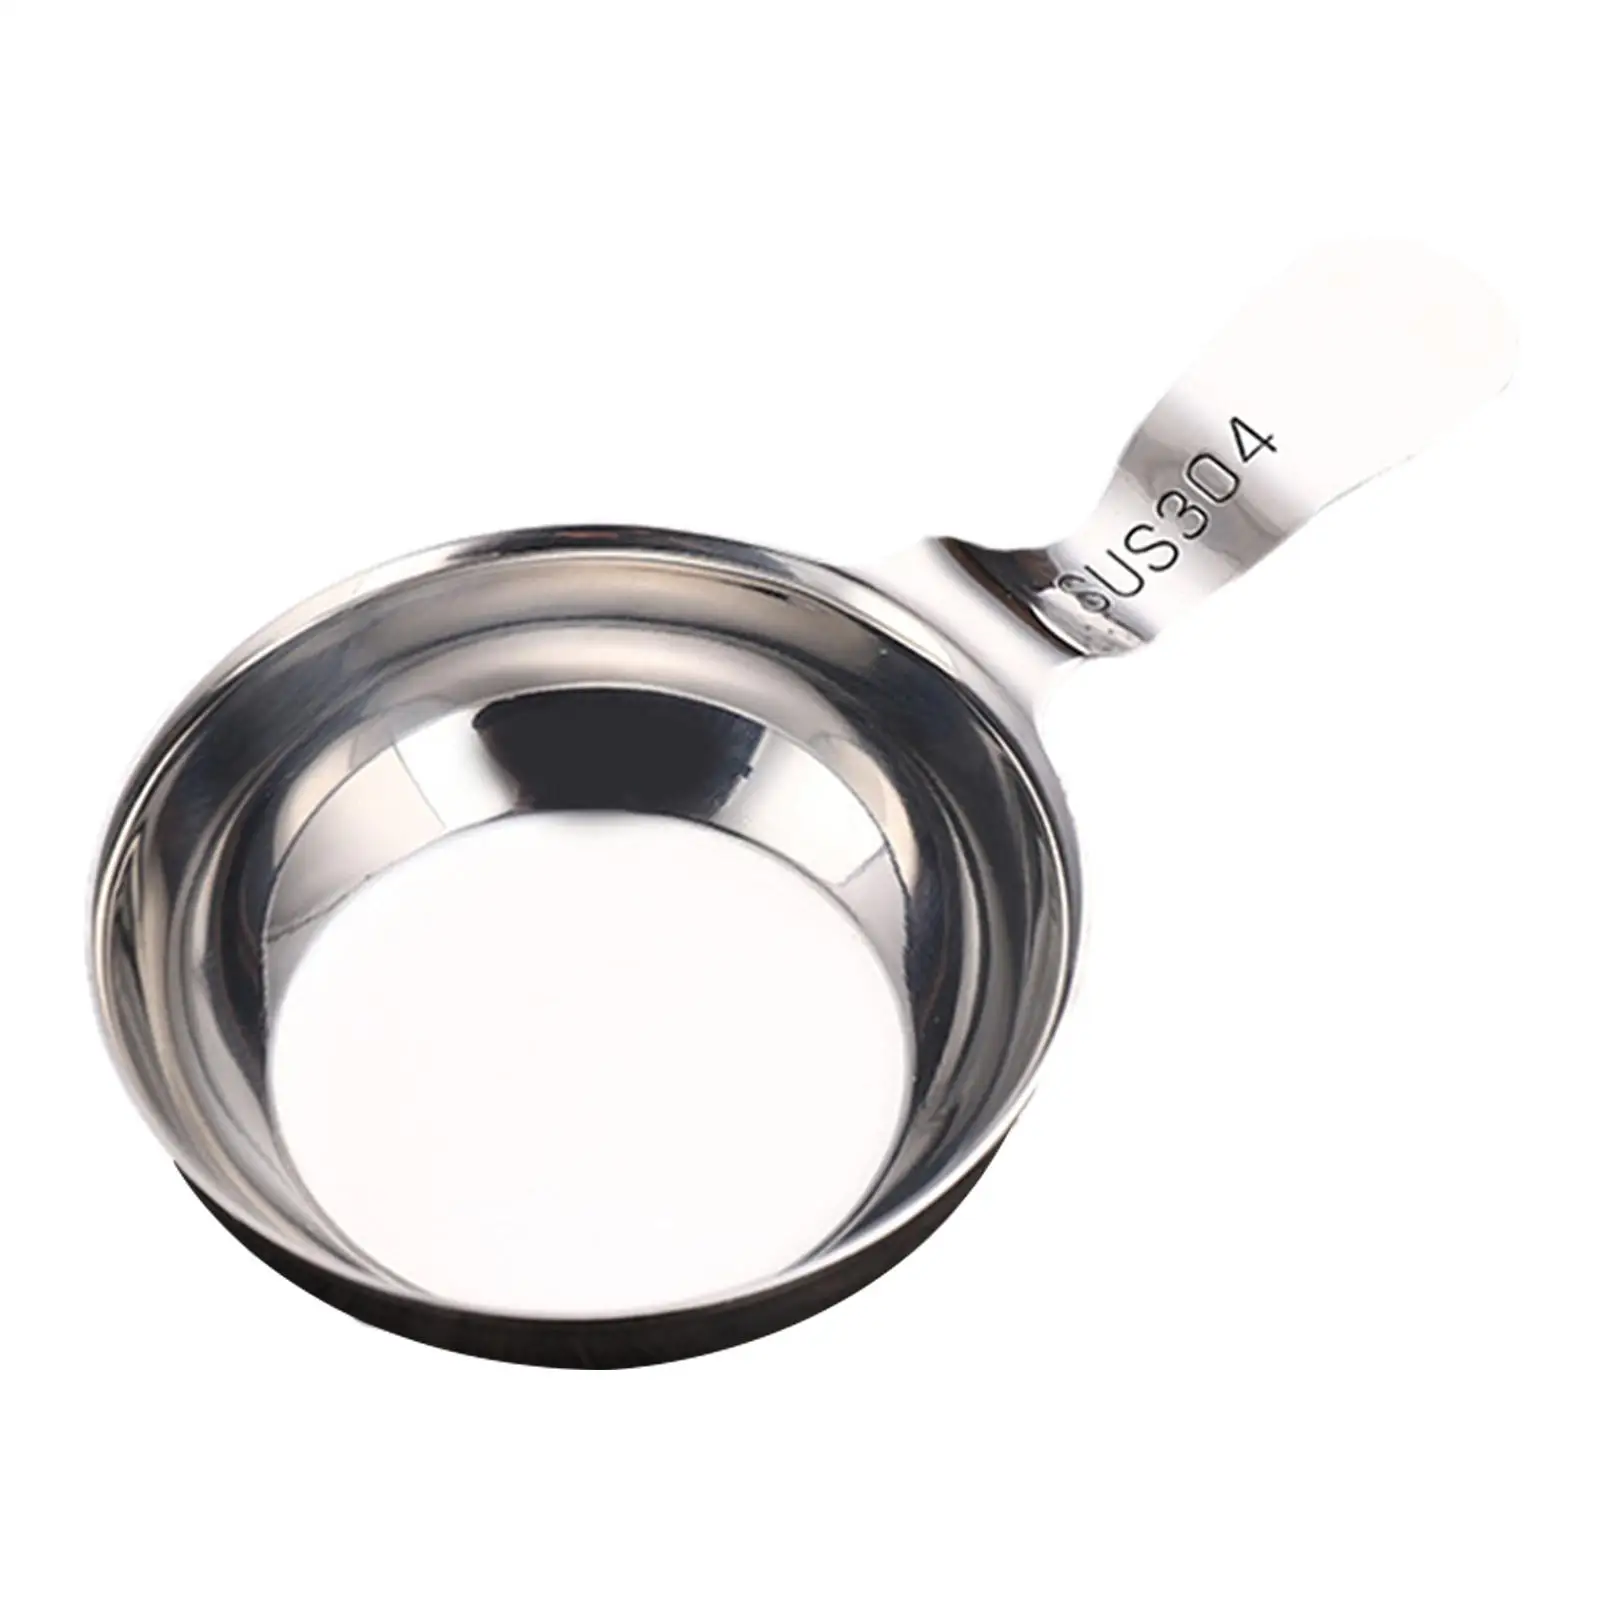 Stainless Steel Portable Household Soy Sauce Dish for Sushi Sauce Camping